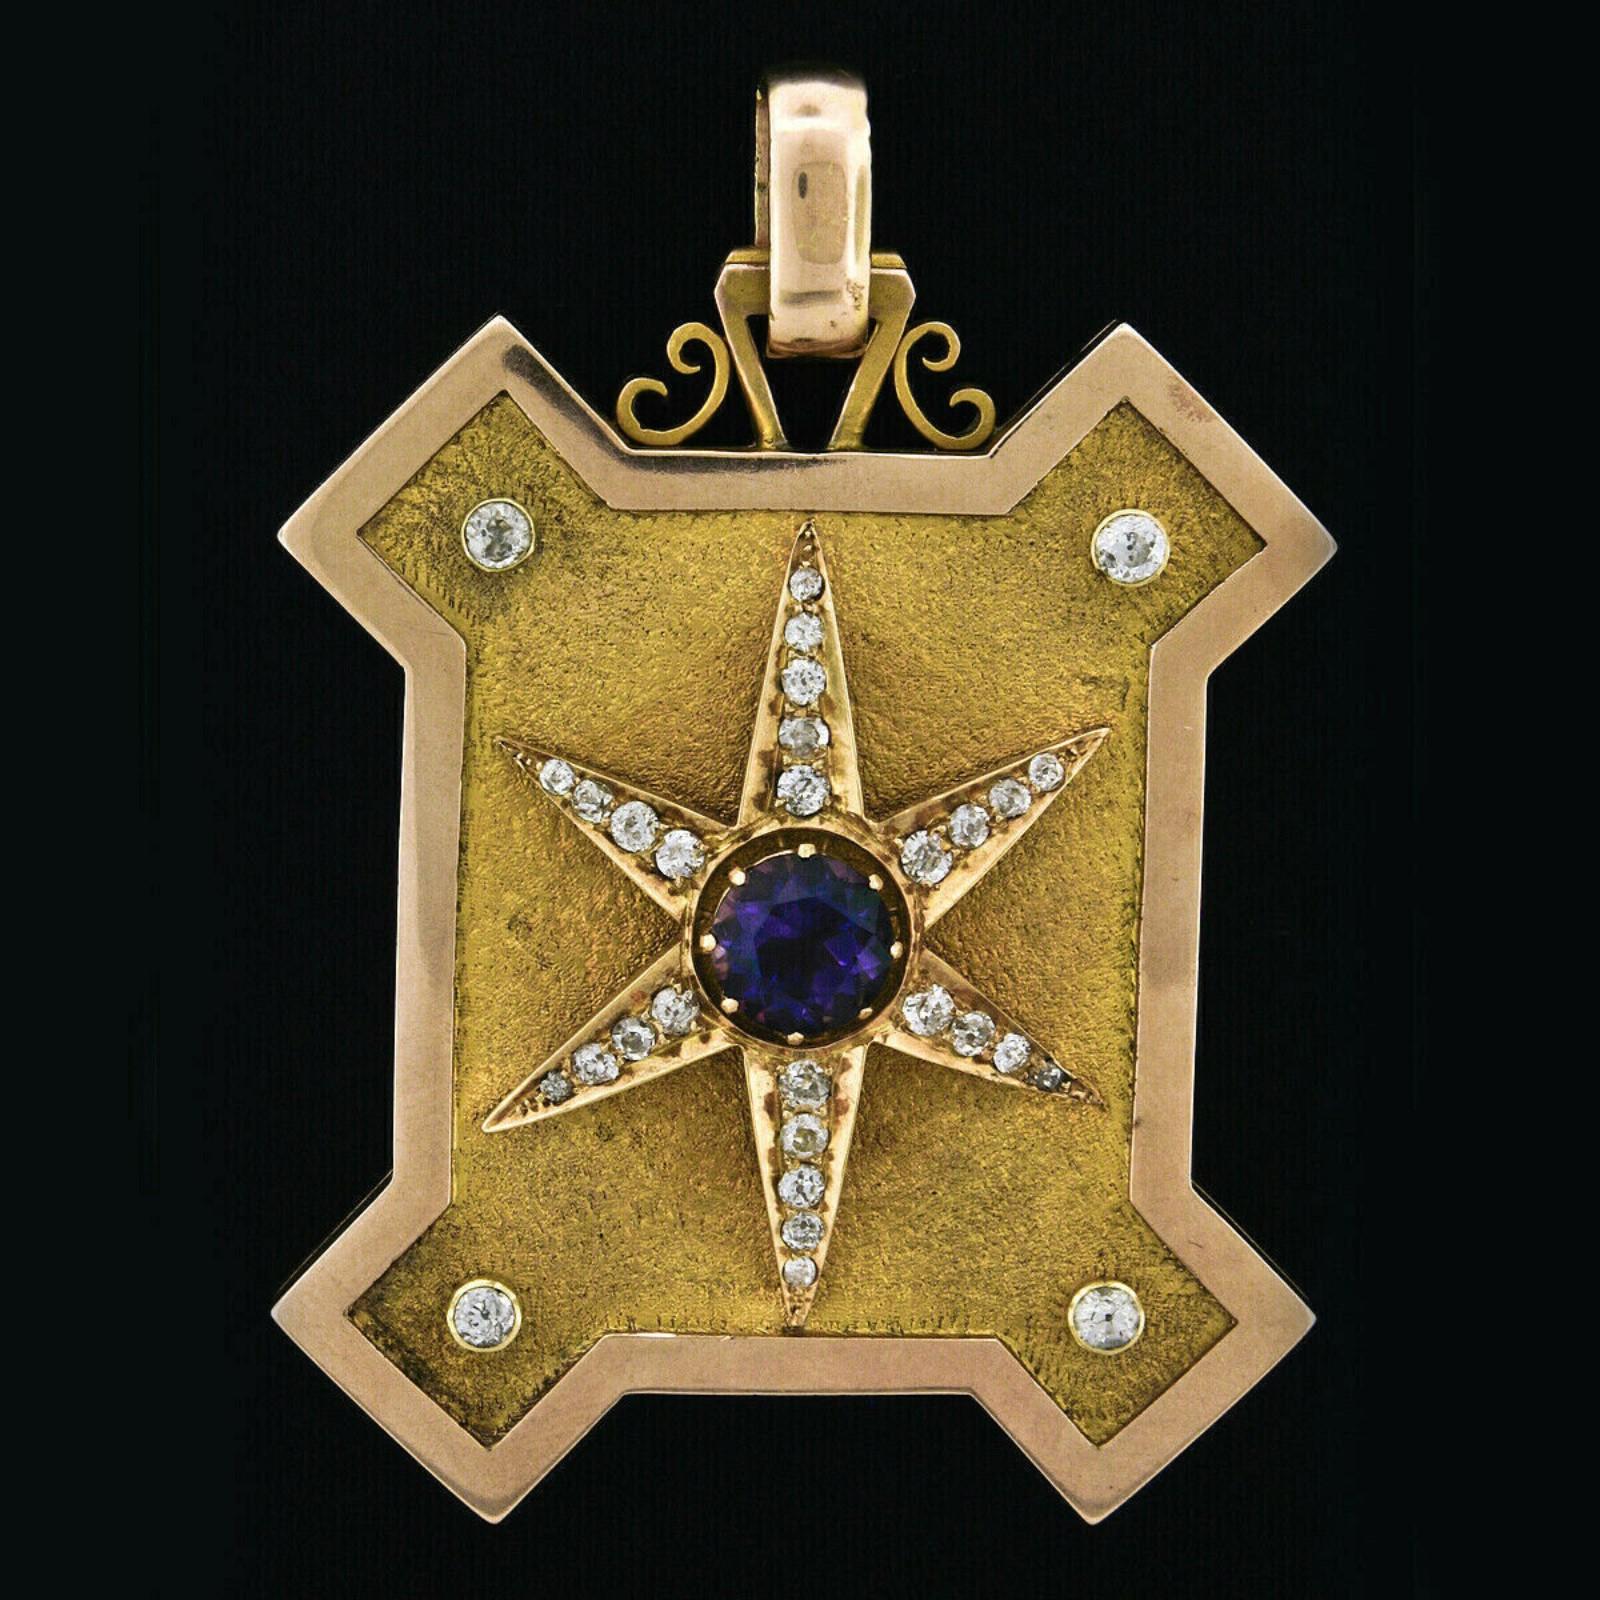 This magnificent and truly one of a kind locket pendant was hand crafted from solid 15k yellow and rose gold during the Victorian era. This piece features an outstanding 9.0mm round cut amethyst prong set at its center and itself at the center of a